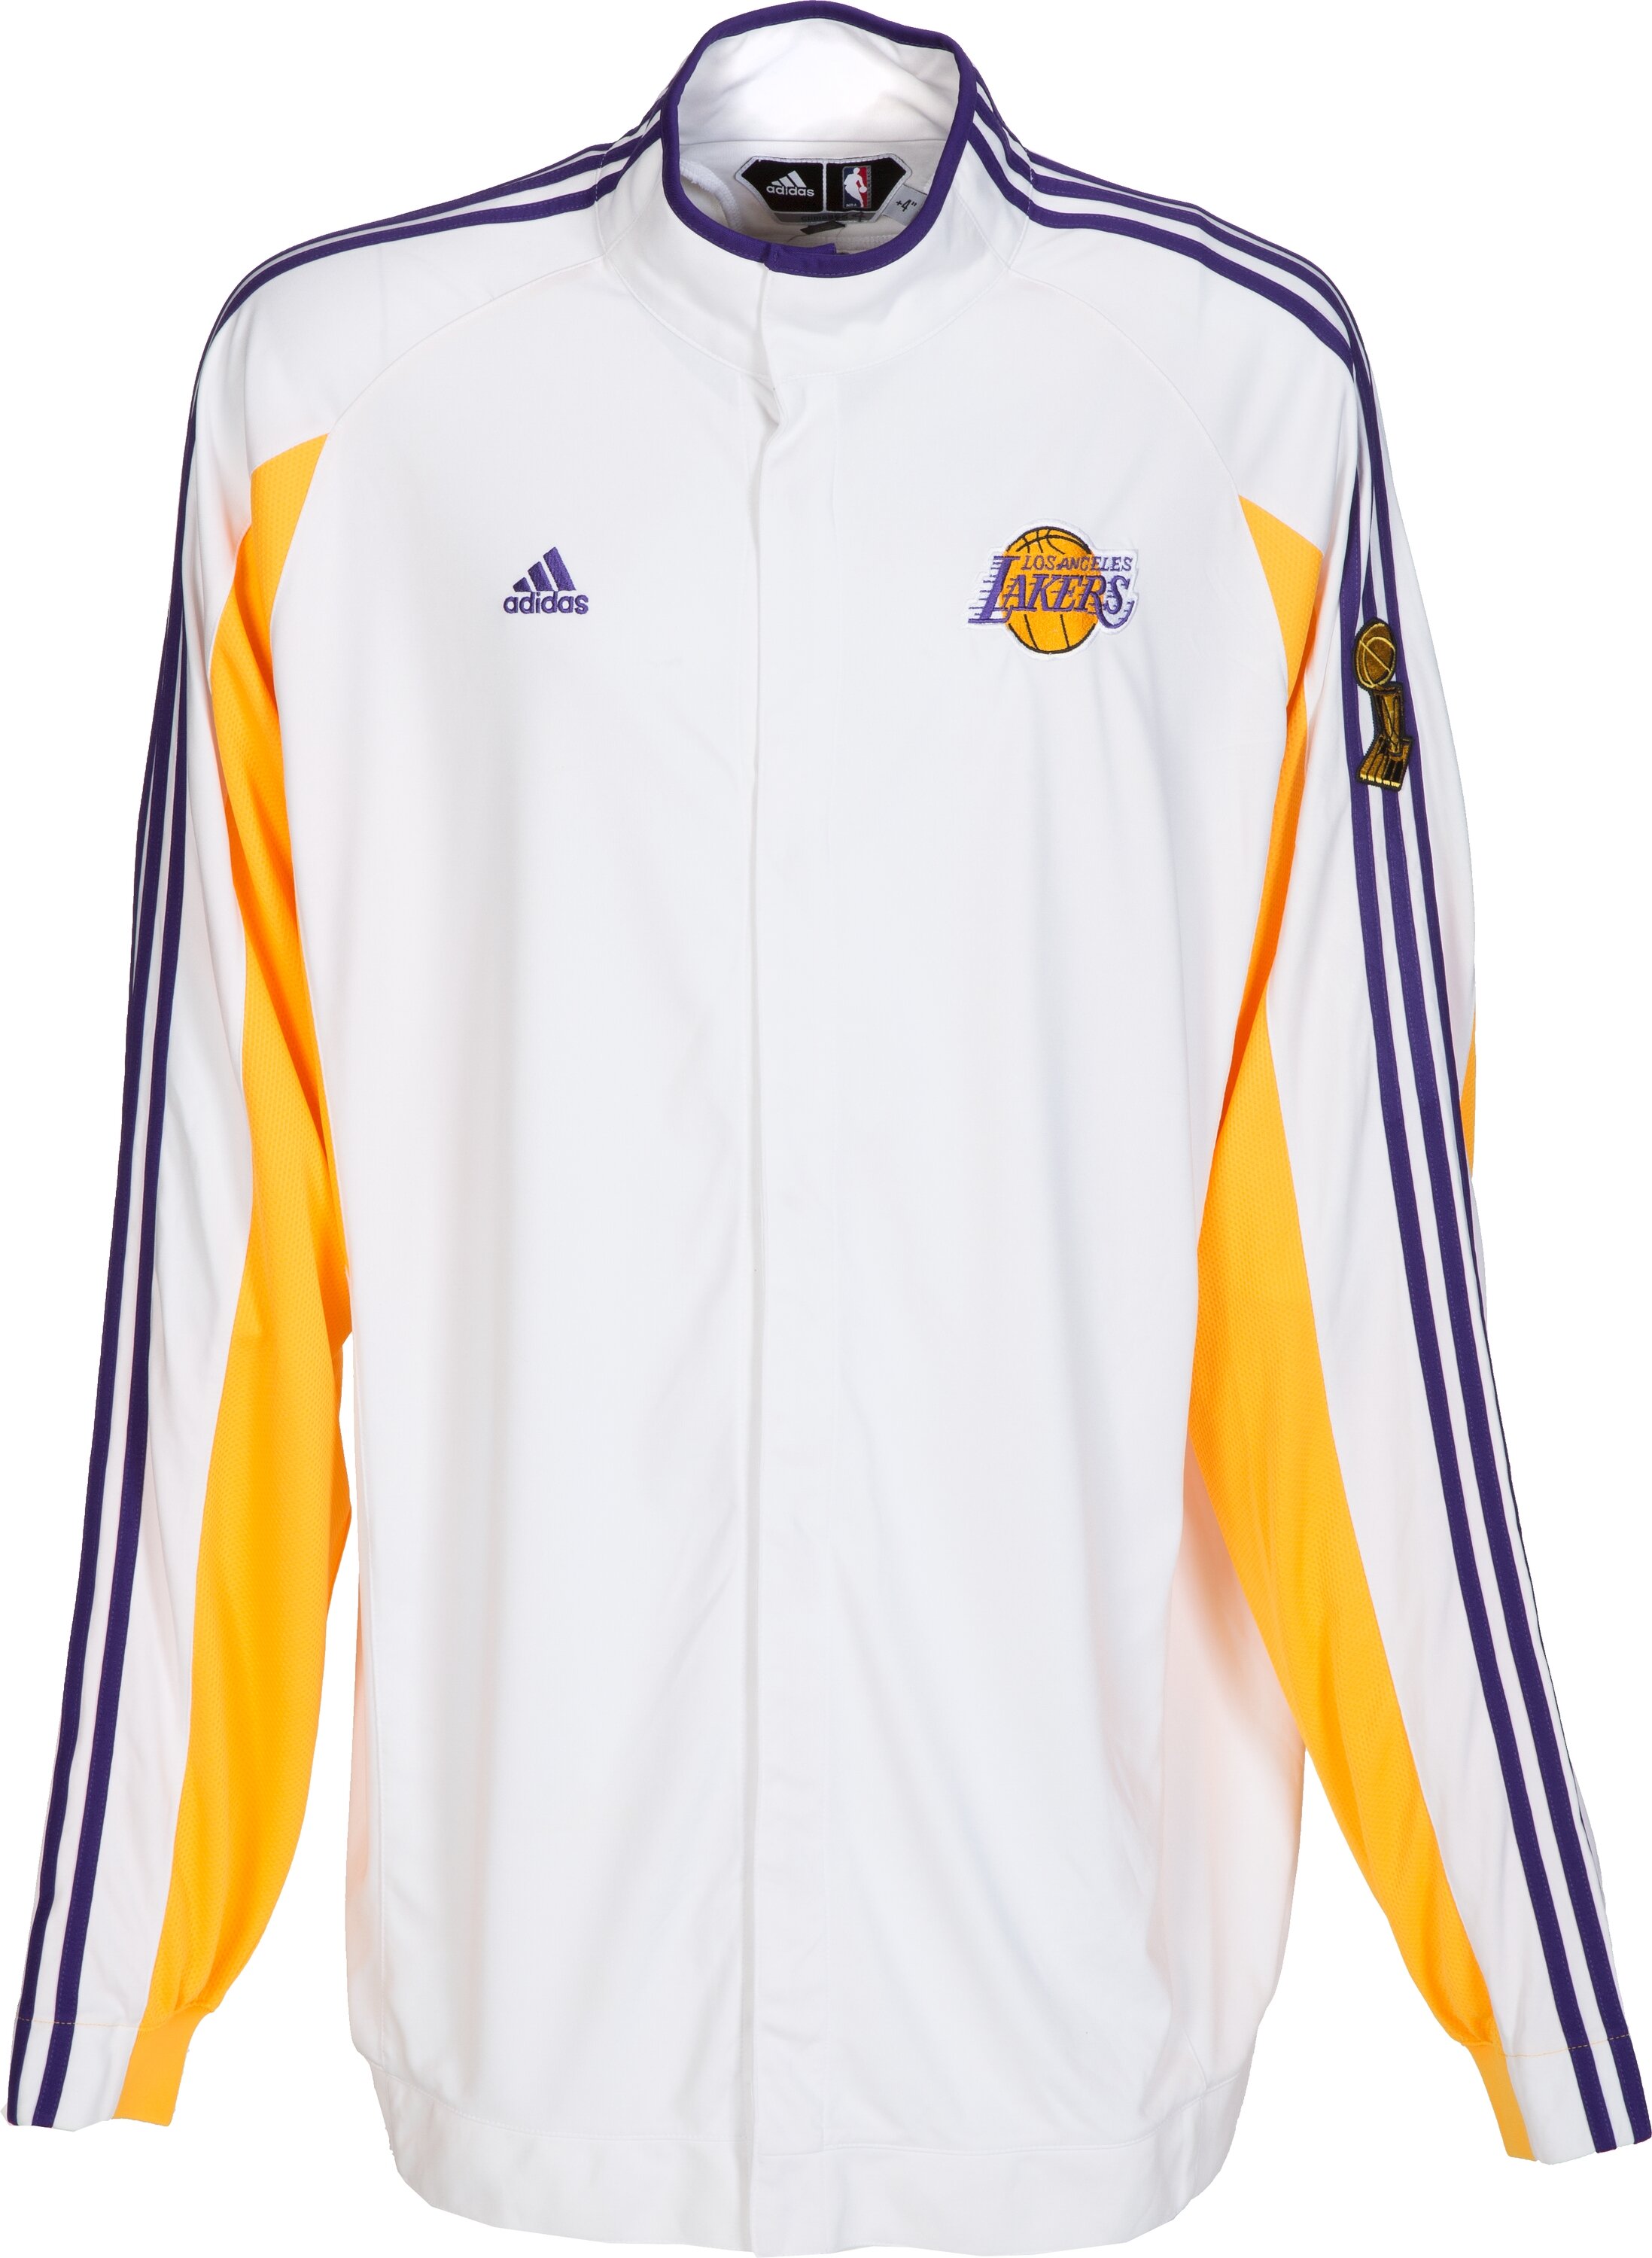 Adidas NBA Los Angeles LA Lakers Kobe Bryant 2009 Championship Hat -  clothing & accessories - by owner - apparel sale